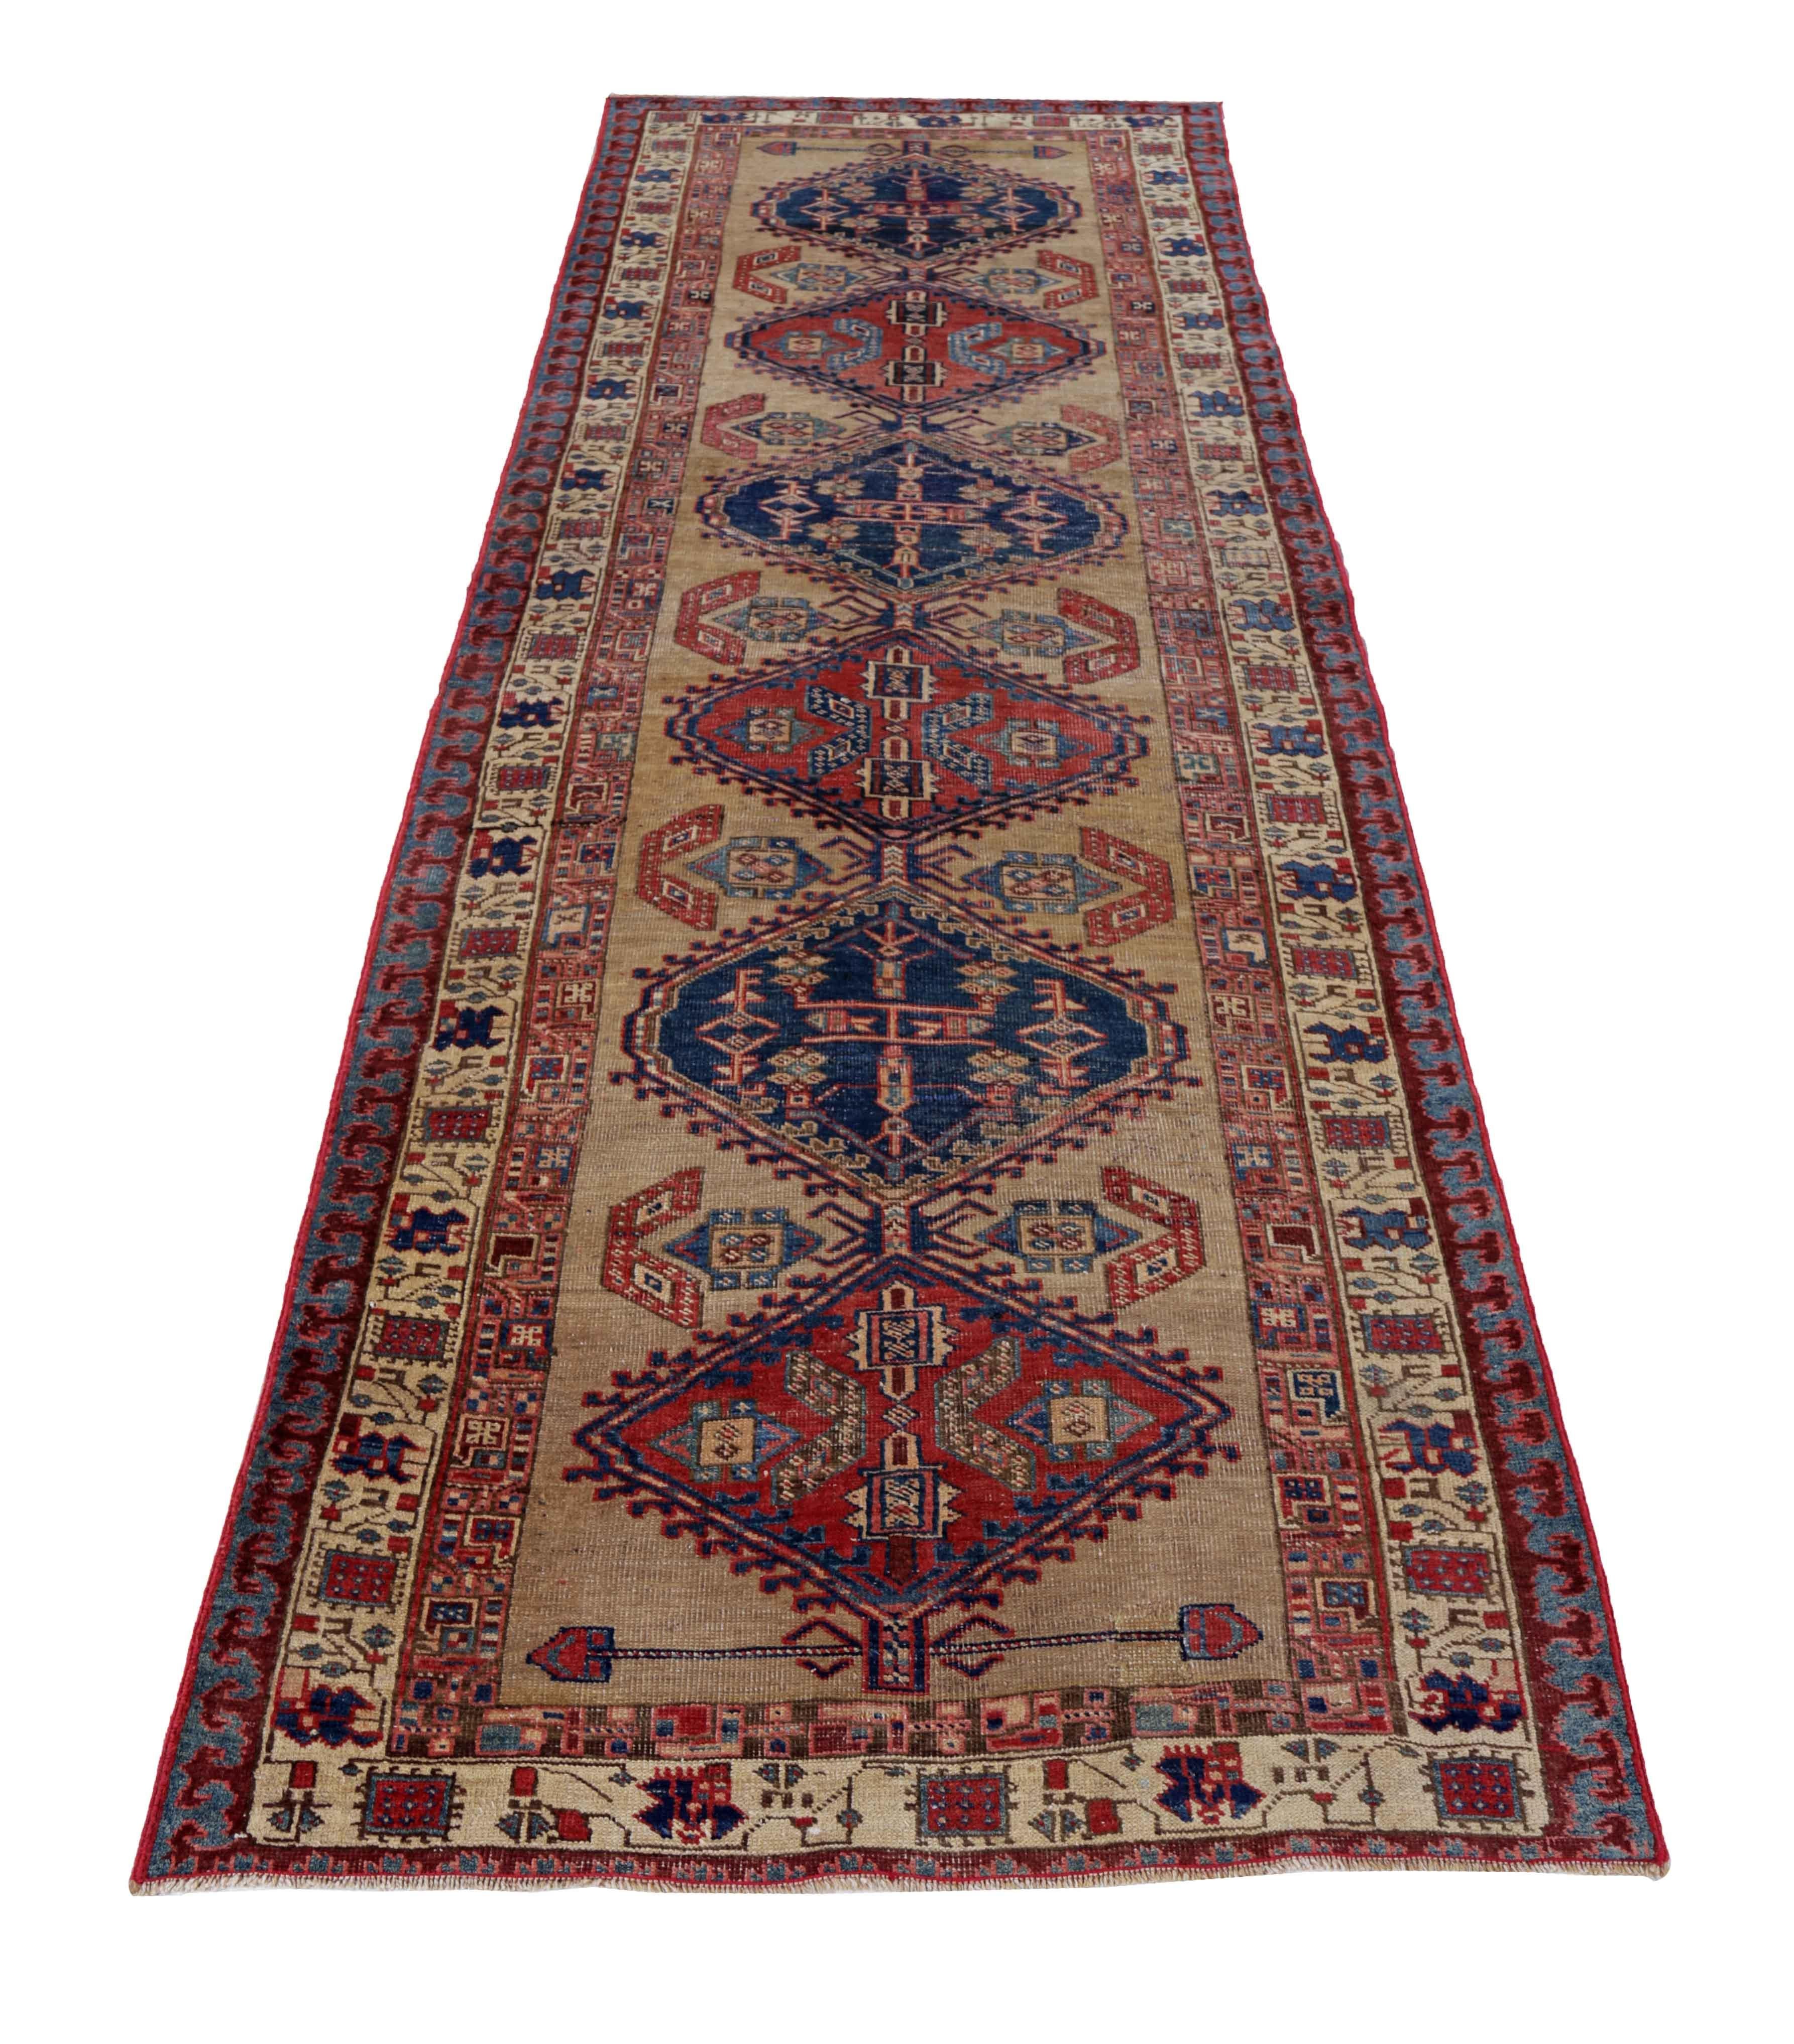 Antique Persian runner rug handwoven from the finest sheep’s wool. It’s colored with all-natural vegetable dyes that are safe for humans and pets. It’s a traditional Sarab design handwoven by expert artisans.It’s a lovely runner rug that can be